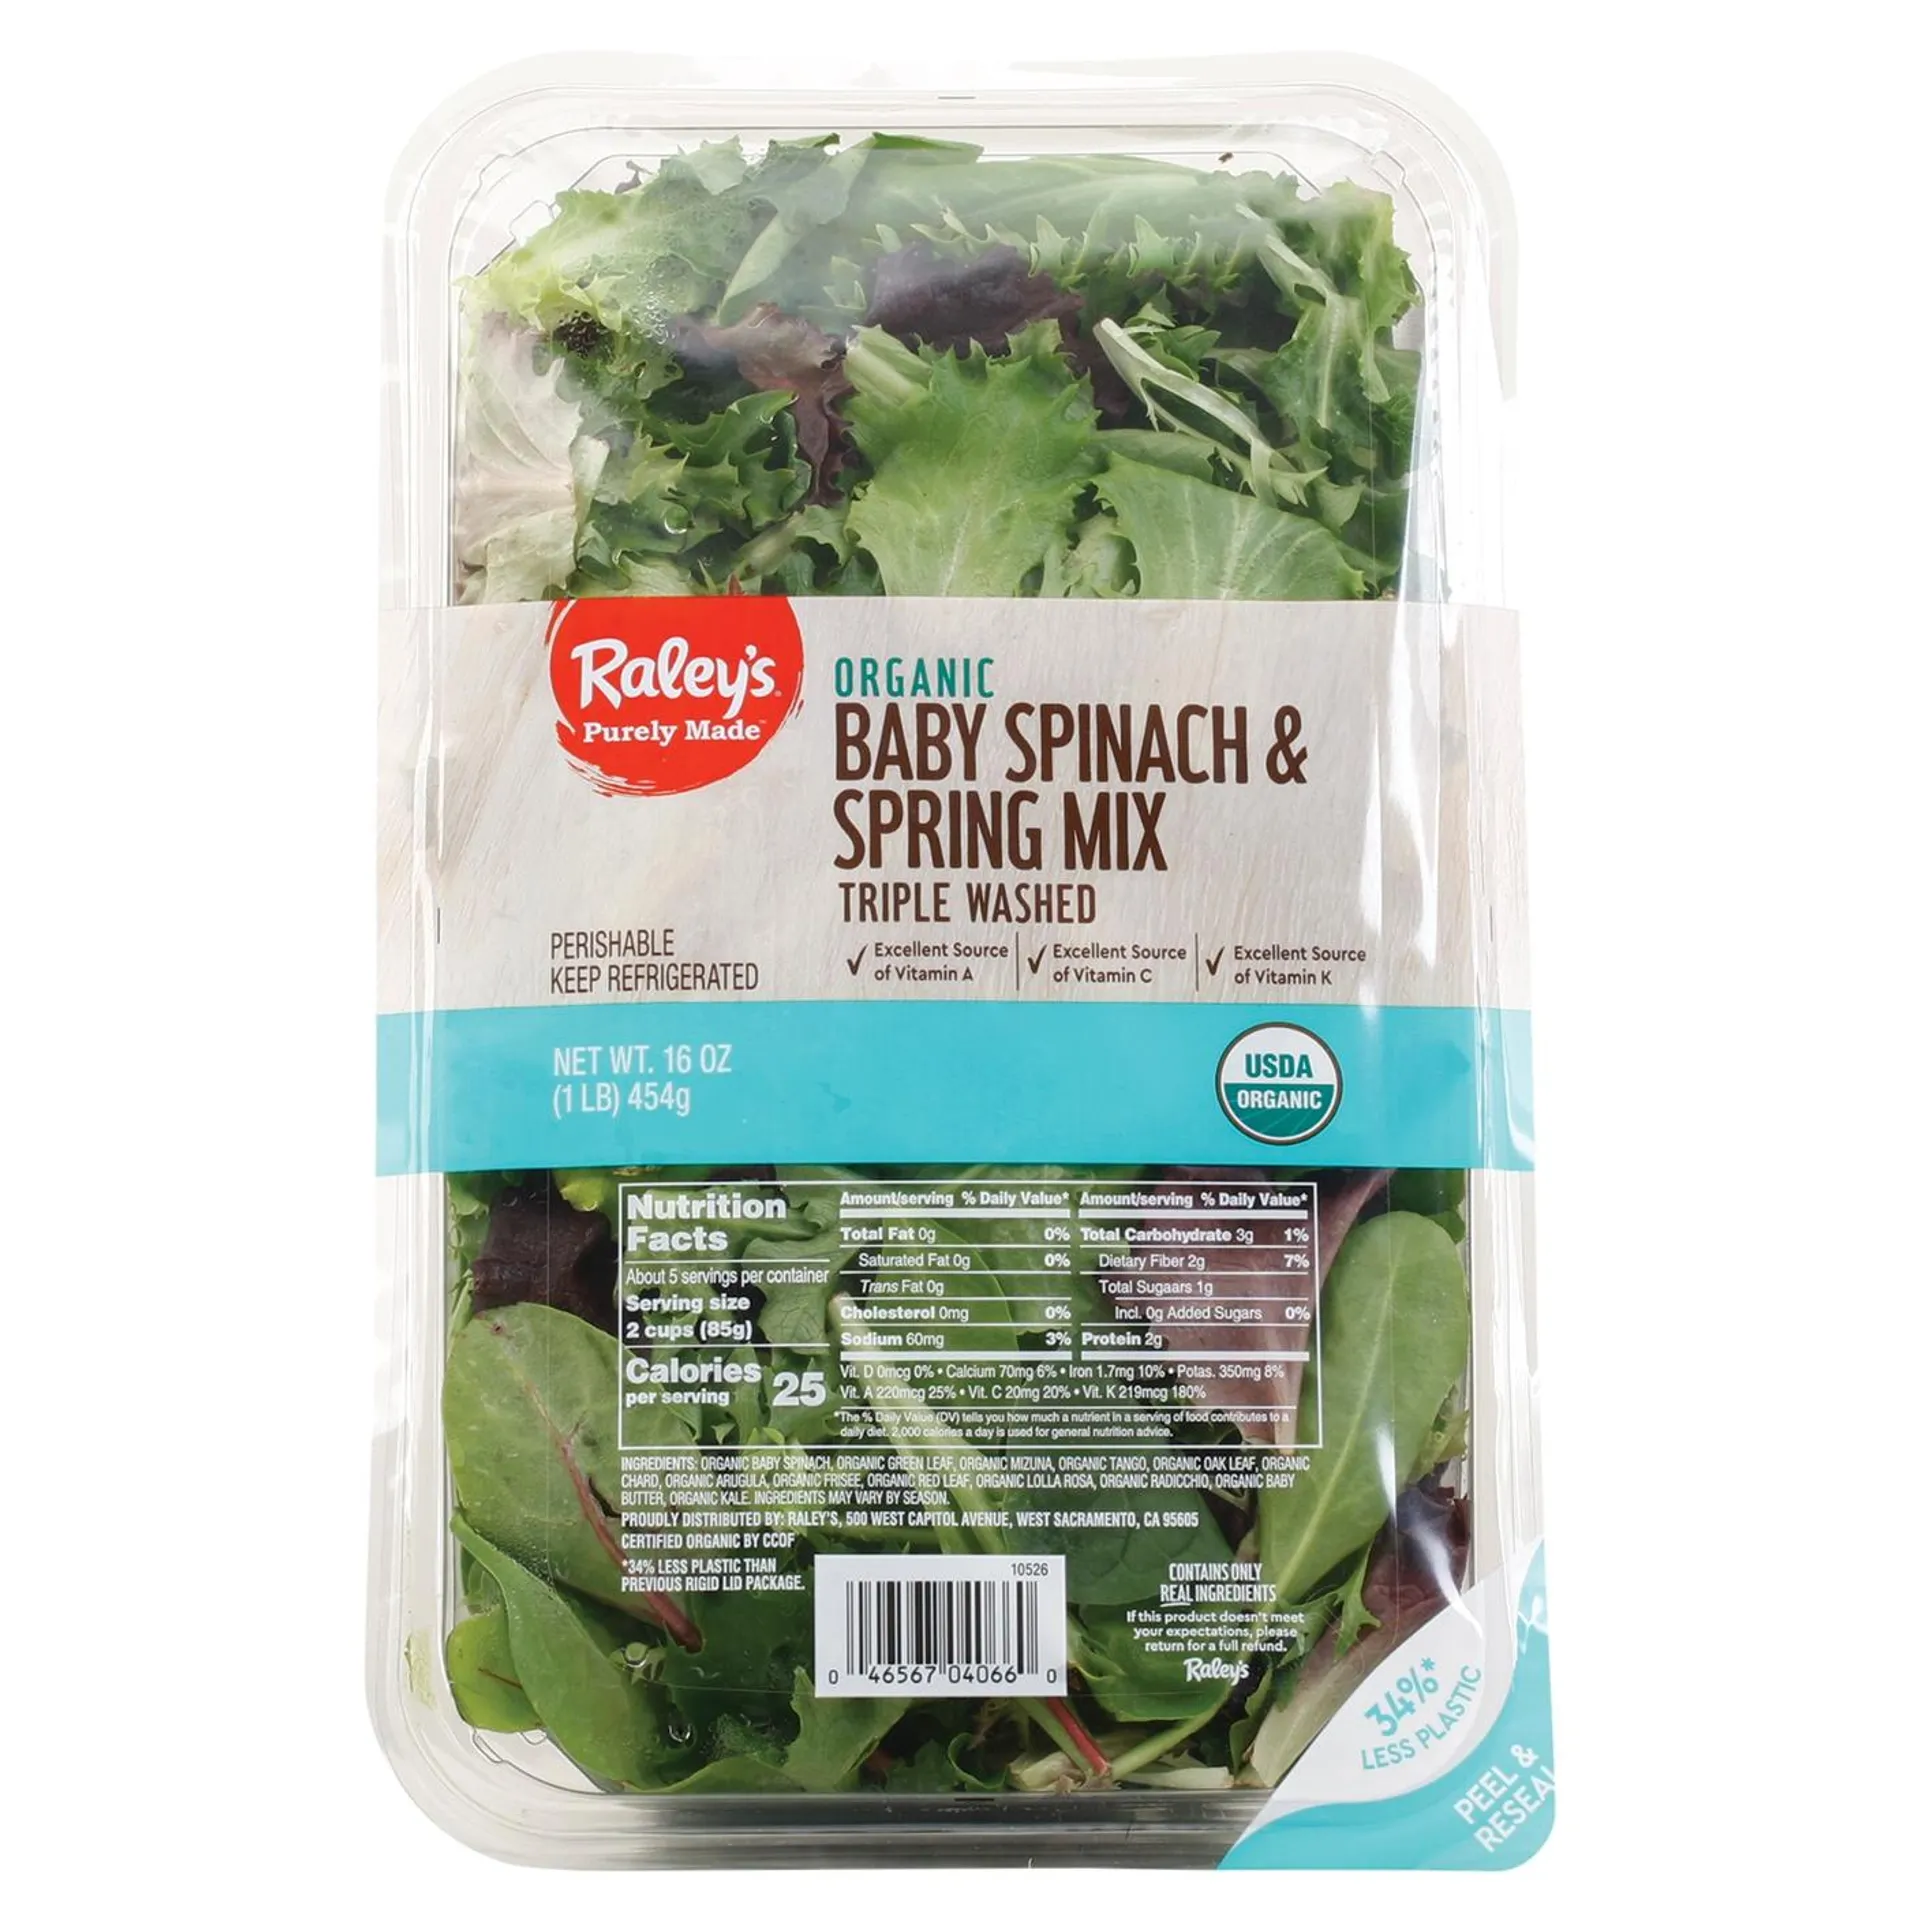 Raley's Purely Made Organic Baby Spinach & Spring Mix